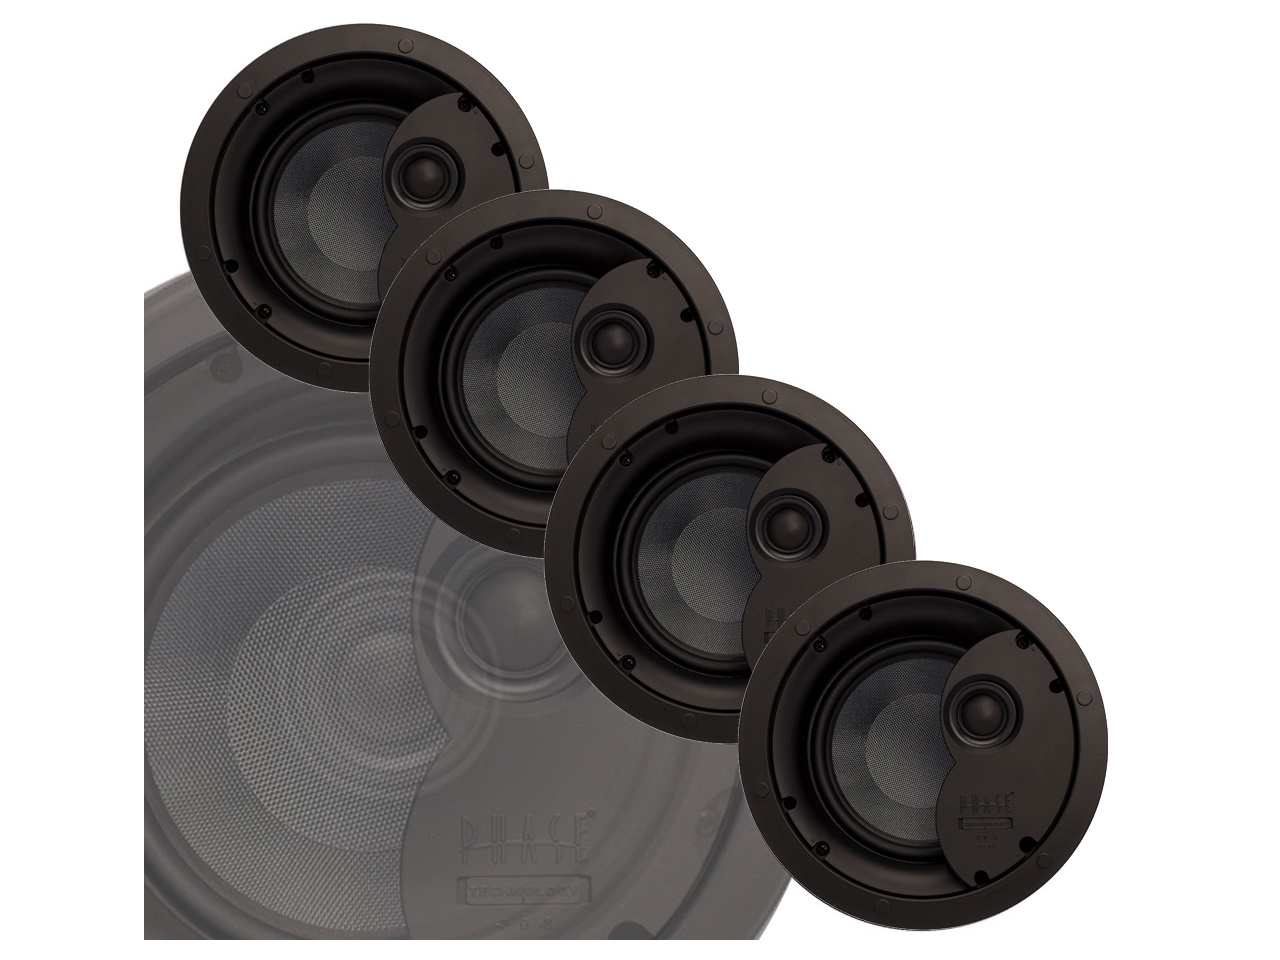 CI6.0 XMP 6.5 inch 2-way Ceiling Speaker Master Pack (4 Units) by Phase Technology